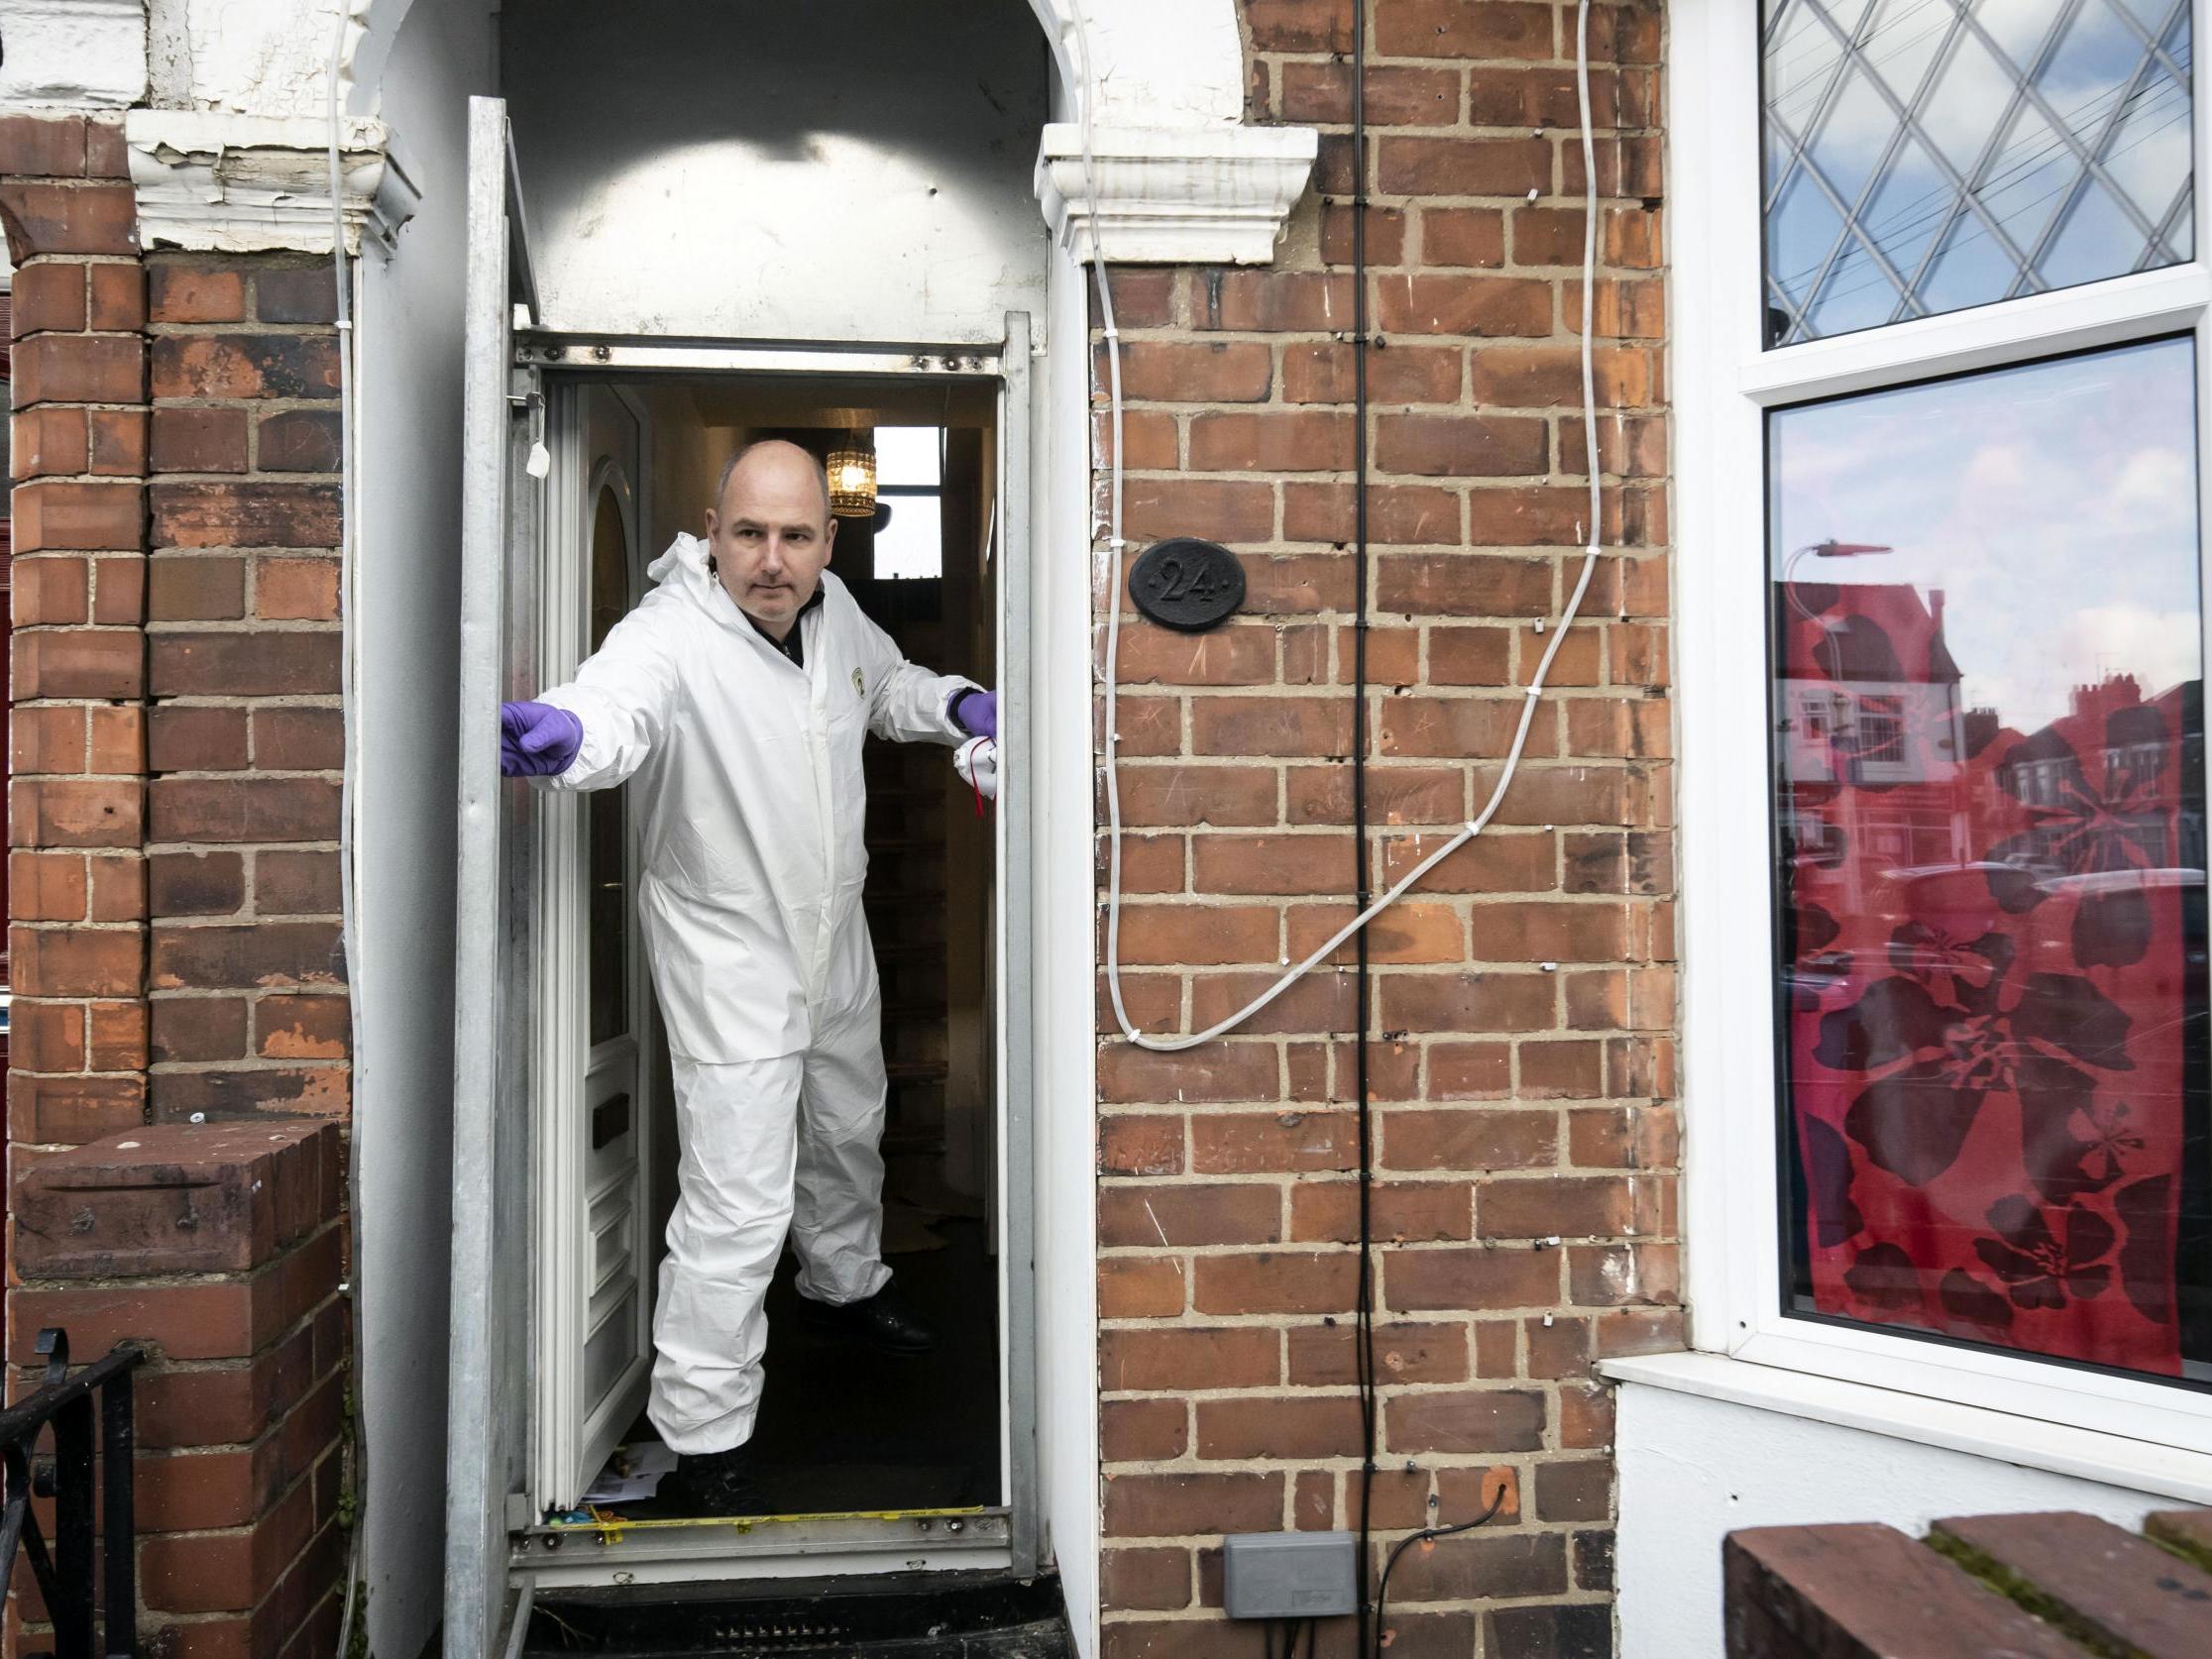 A police officer at Pawel Relowicz's home in Hull (PA)